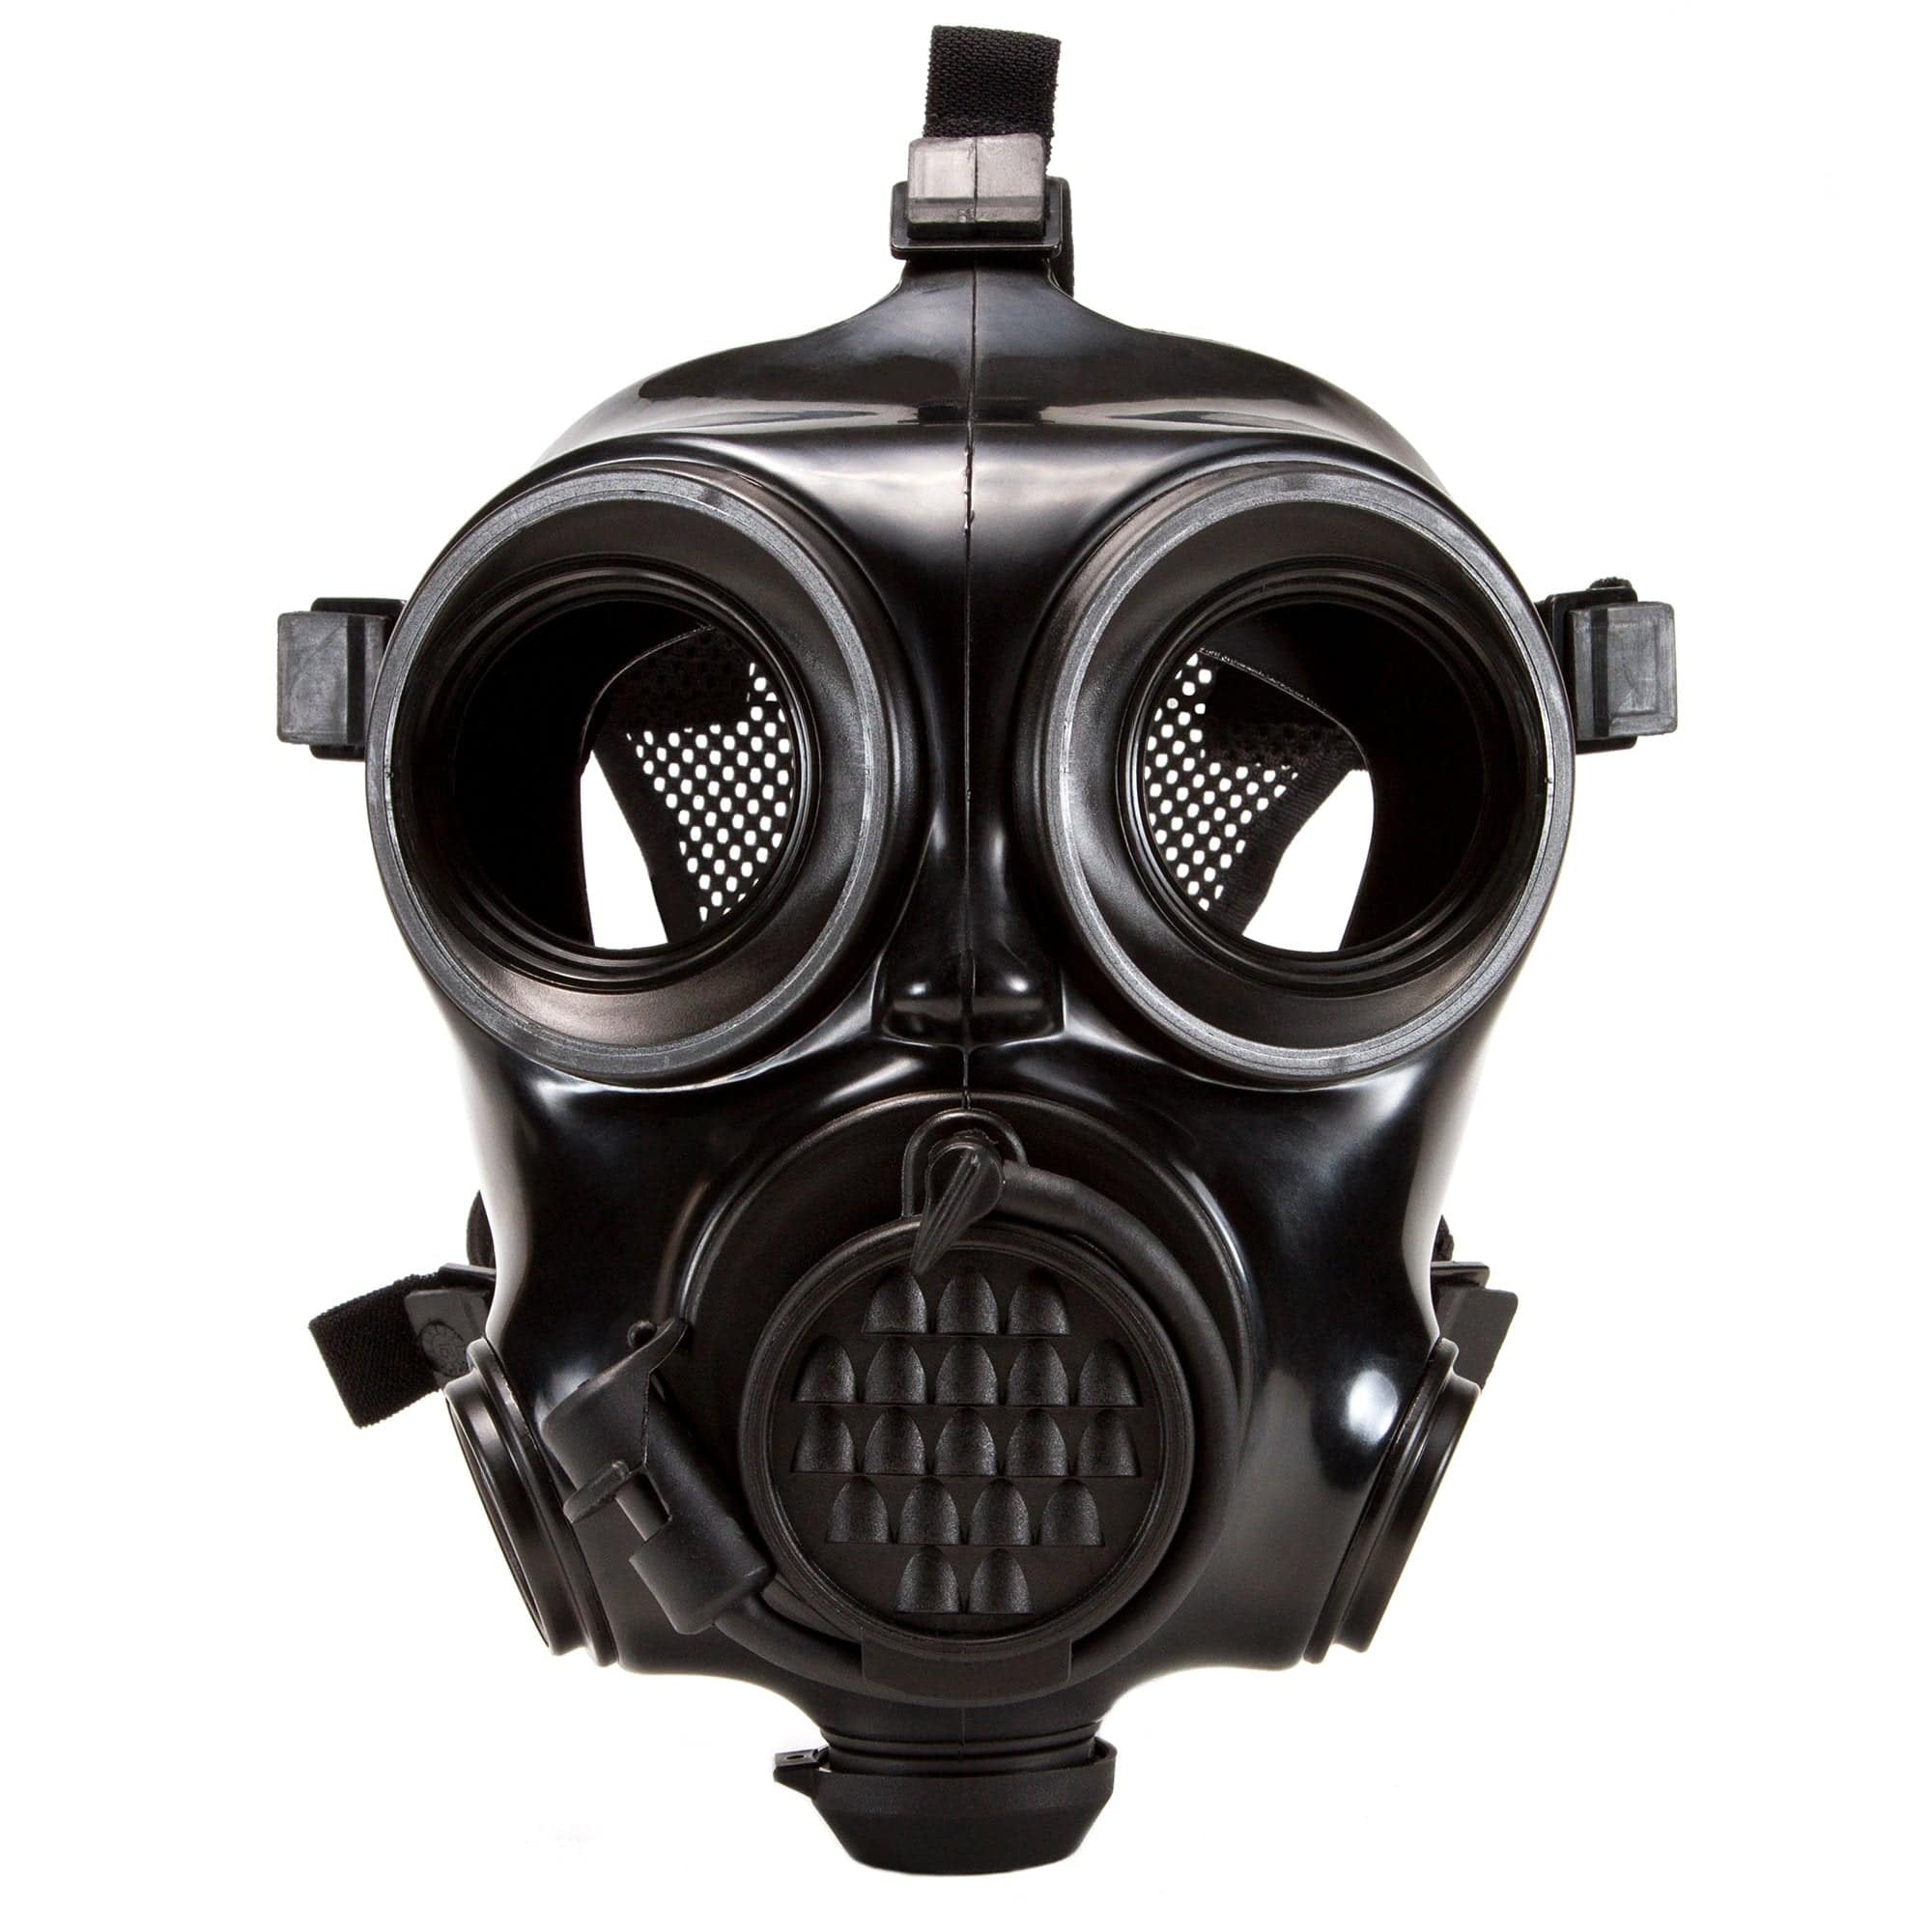 Military Gas Mask, Army Gas Mask, Gas Mask